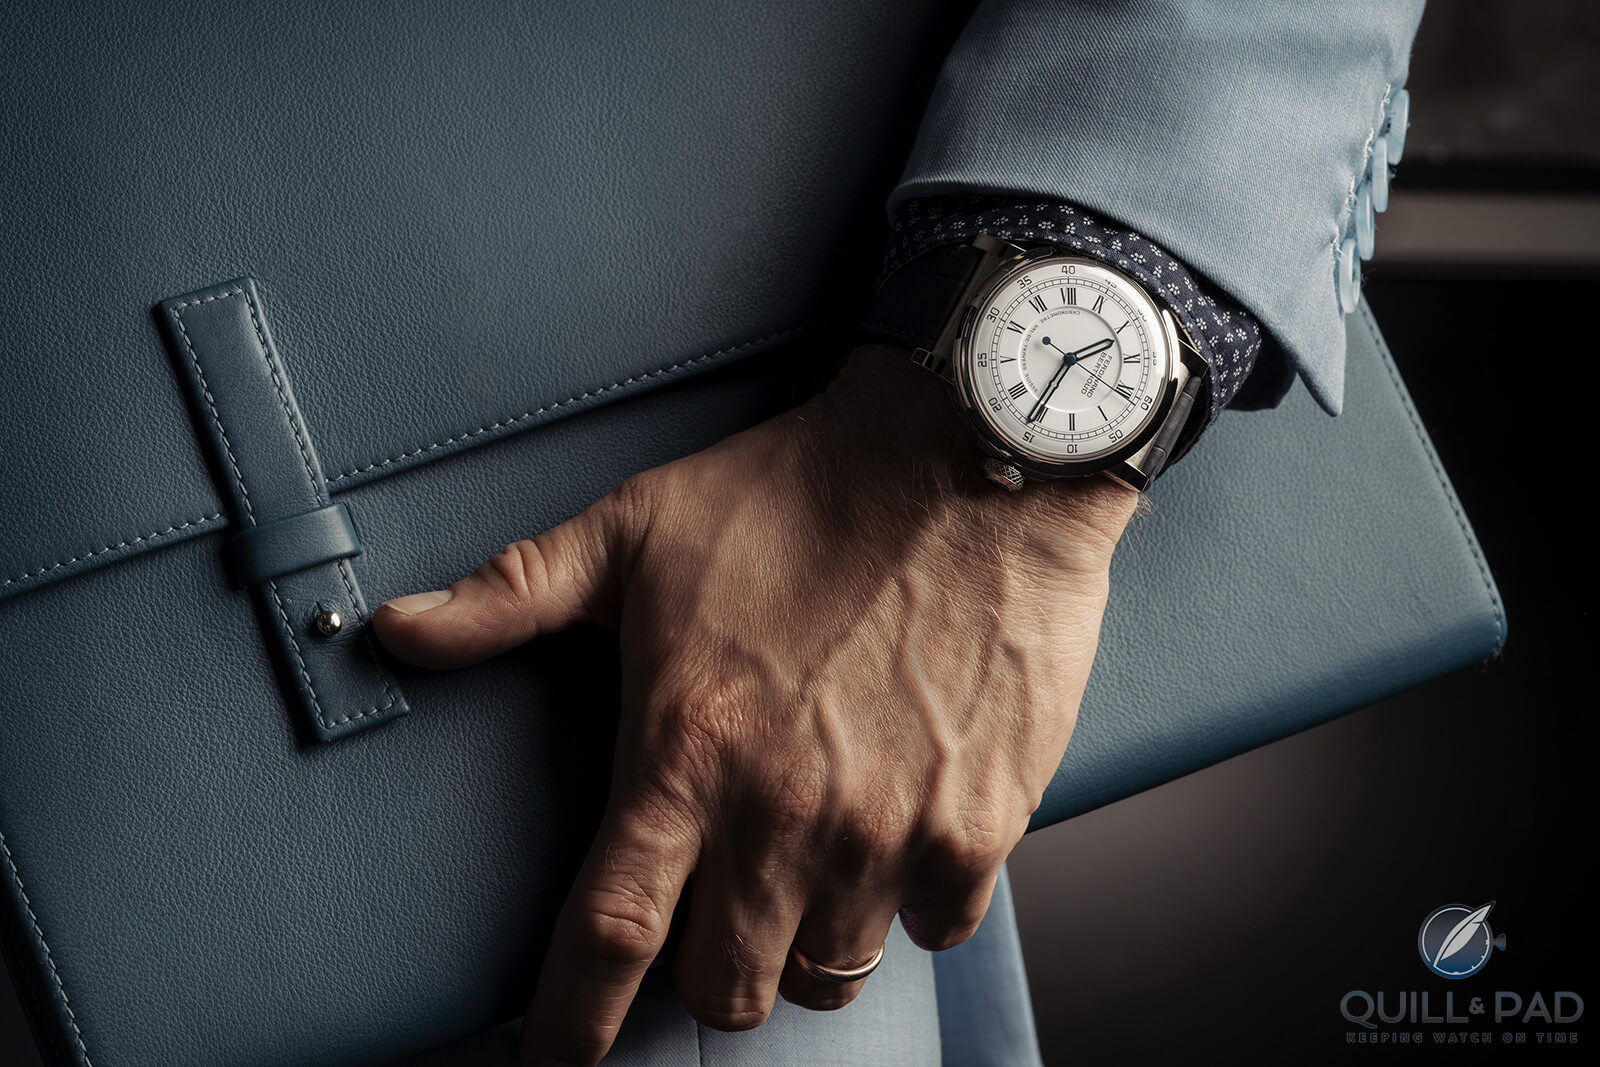 All in good time: Navy chronometers inspire the new Louis Vuitton